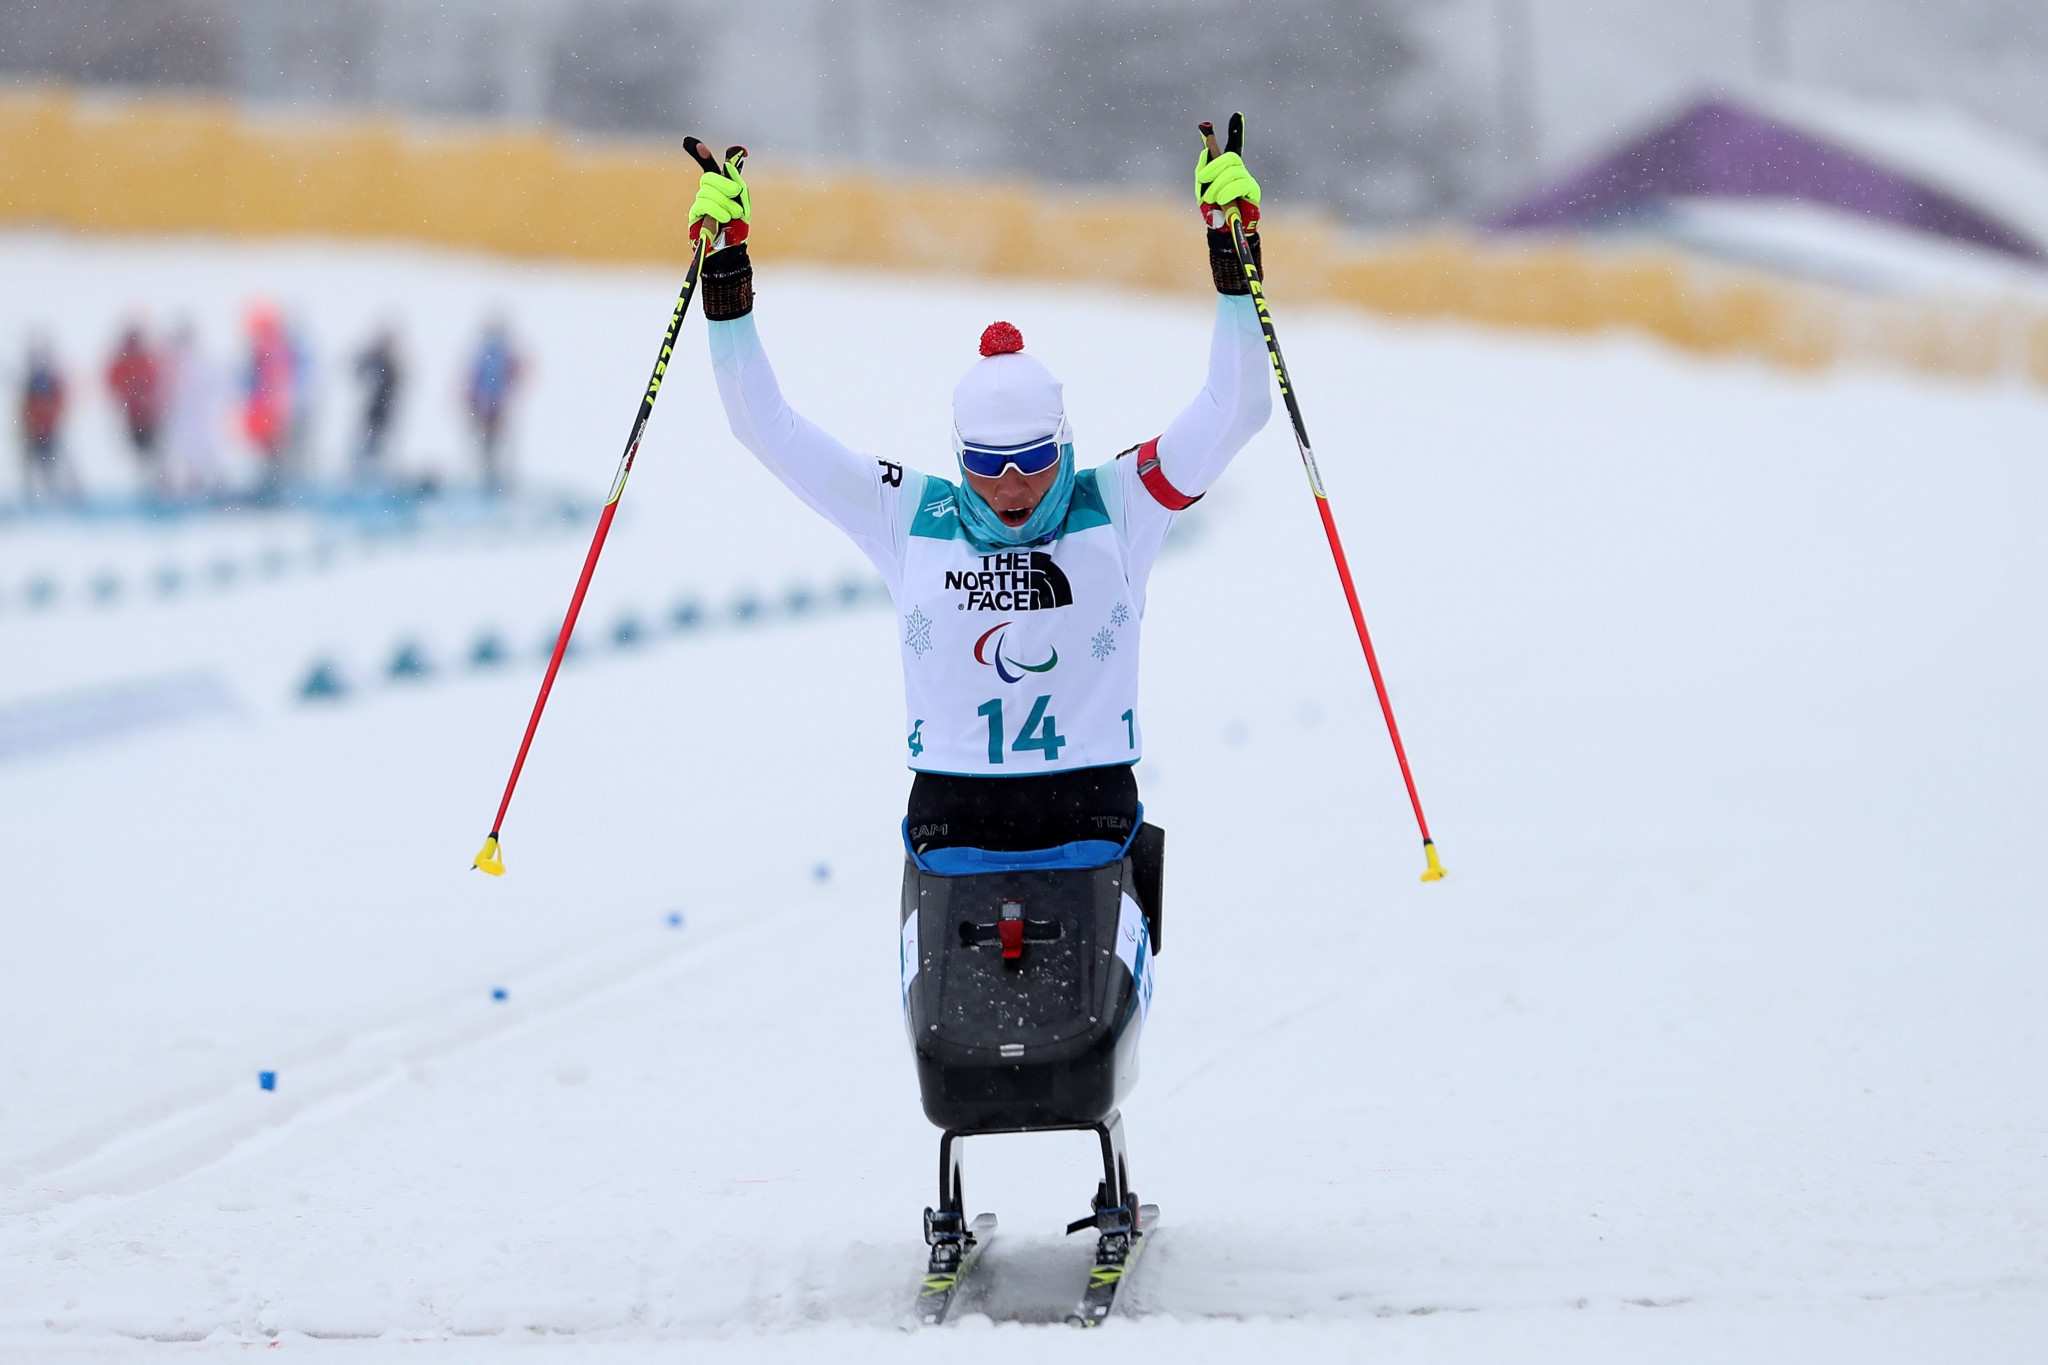 Eskau absent from Germany's squad for Beijing 2022 Winter Paralympics due to "health reasons"